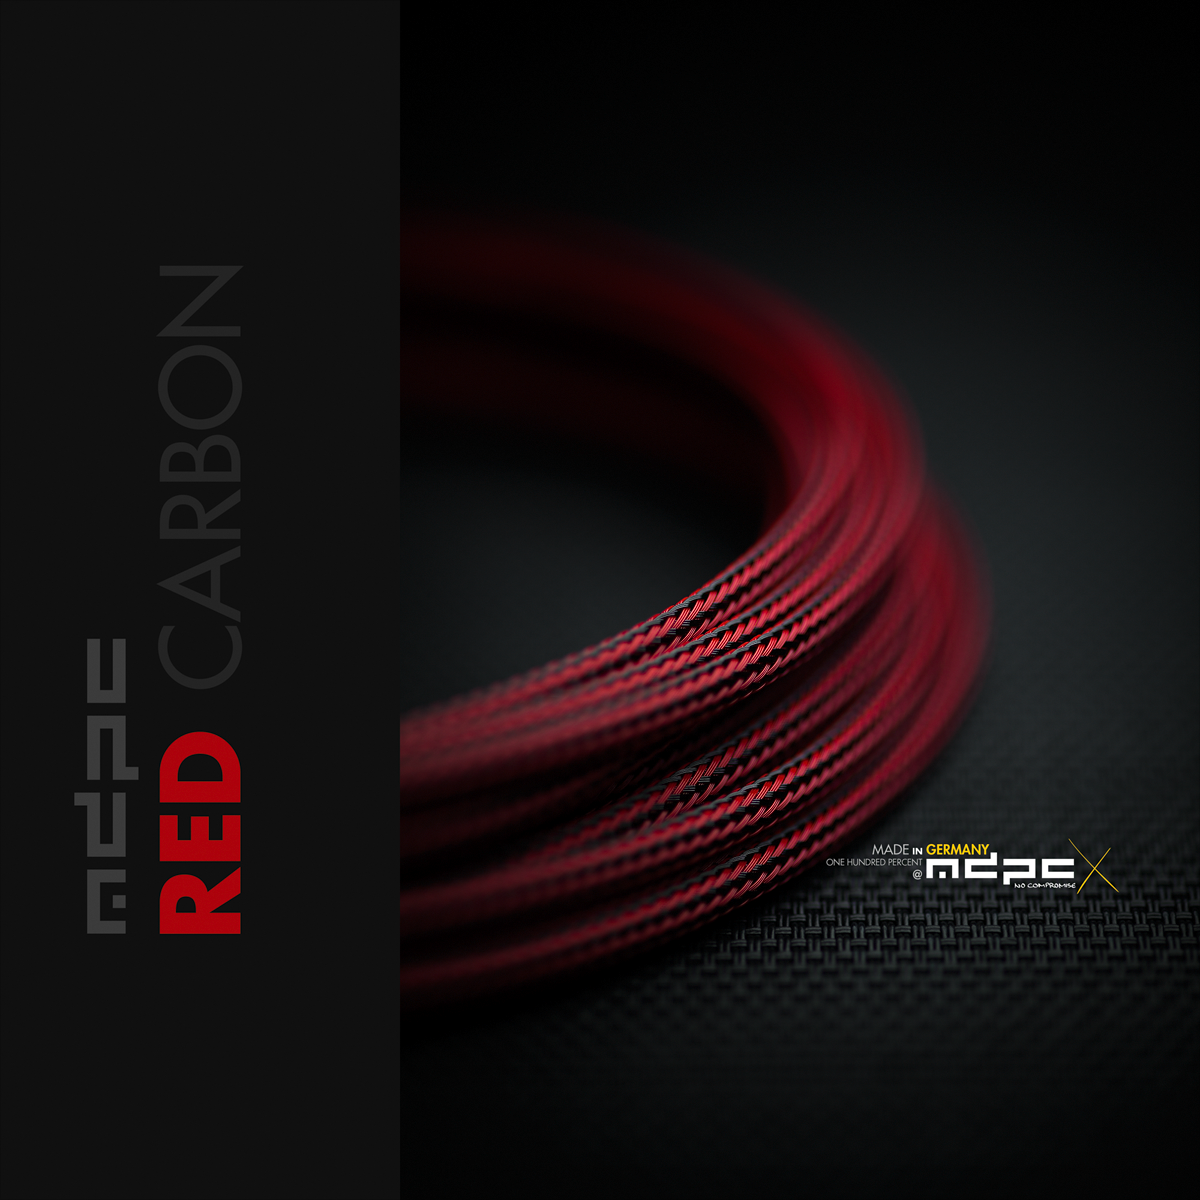 MDPC-X Red Carbon Small